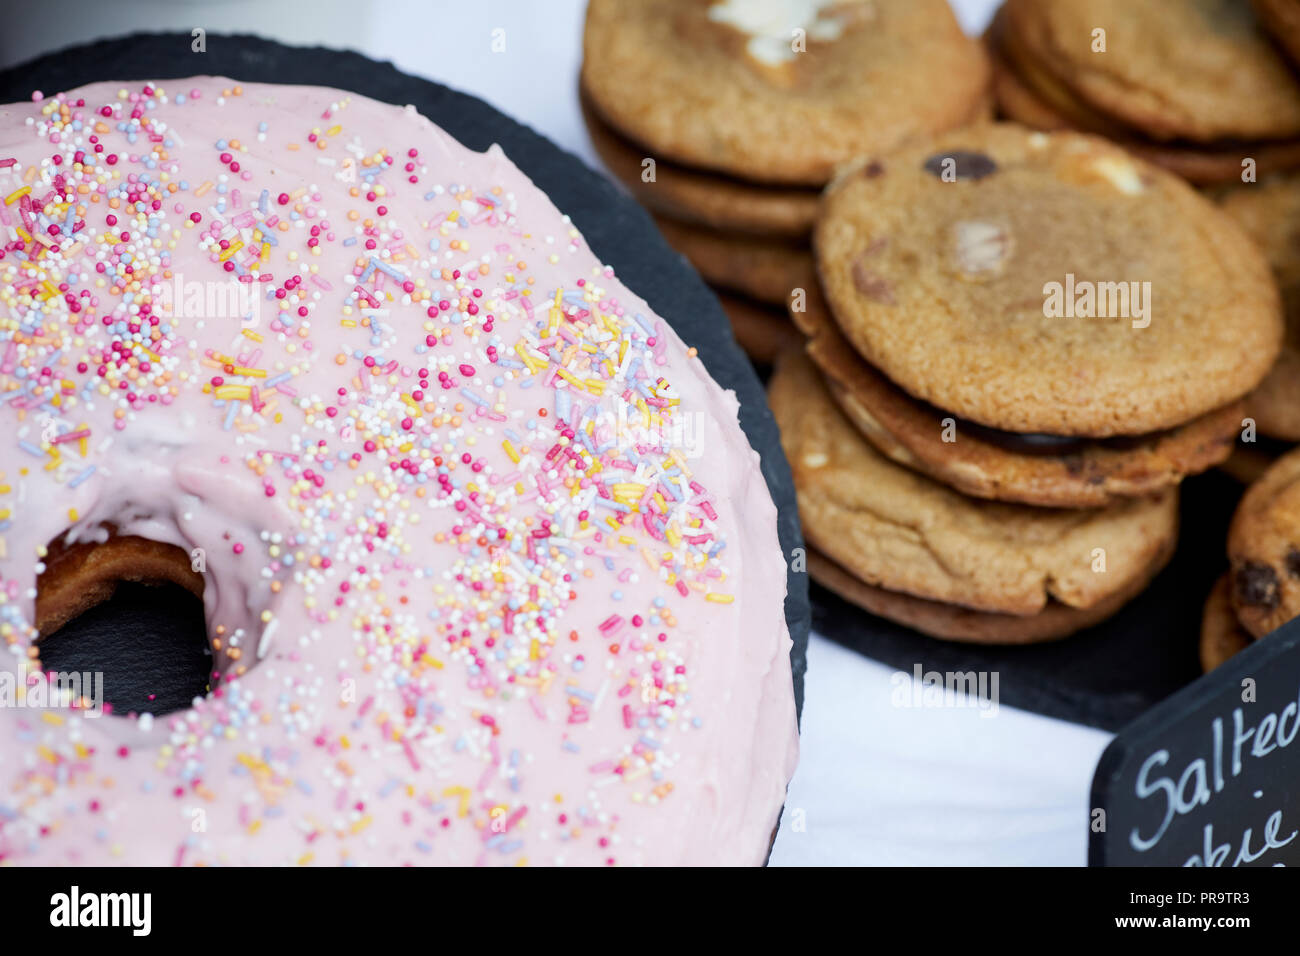 large donut and cookies Stock Photo